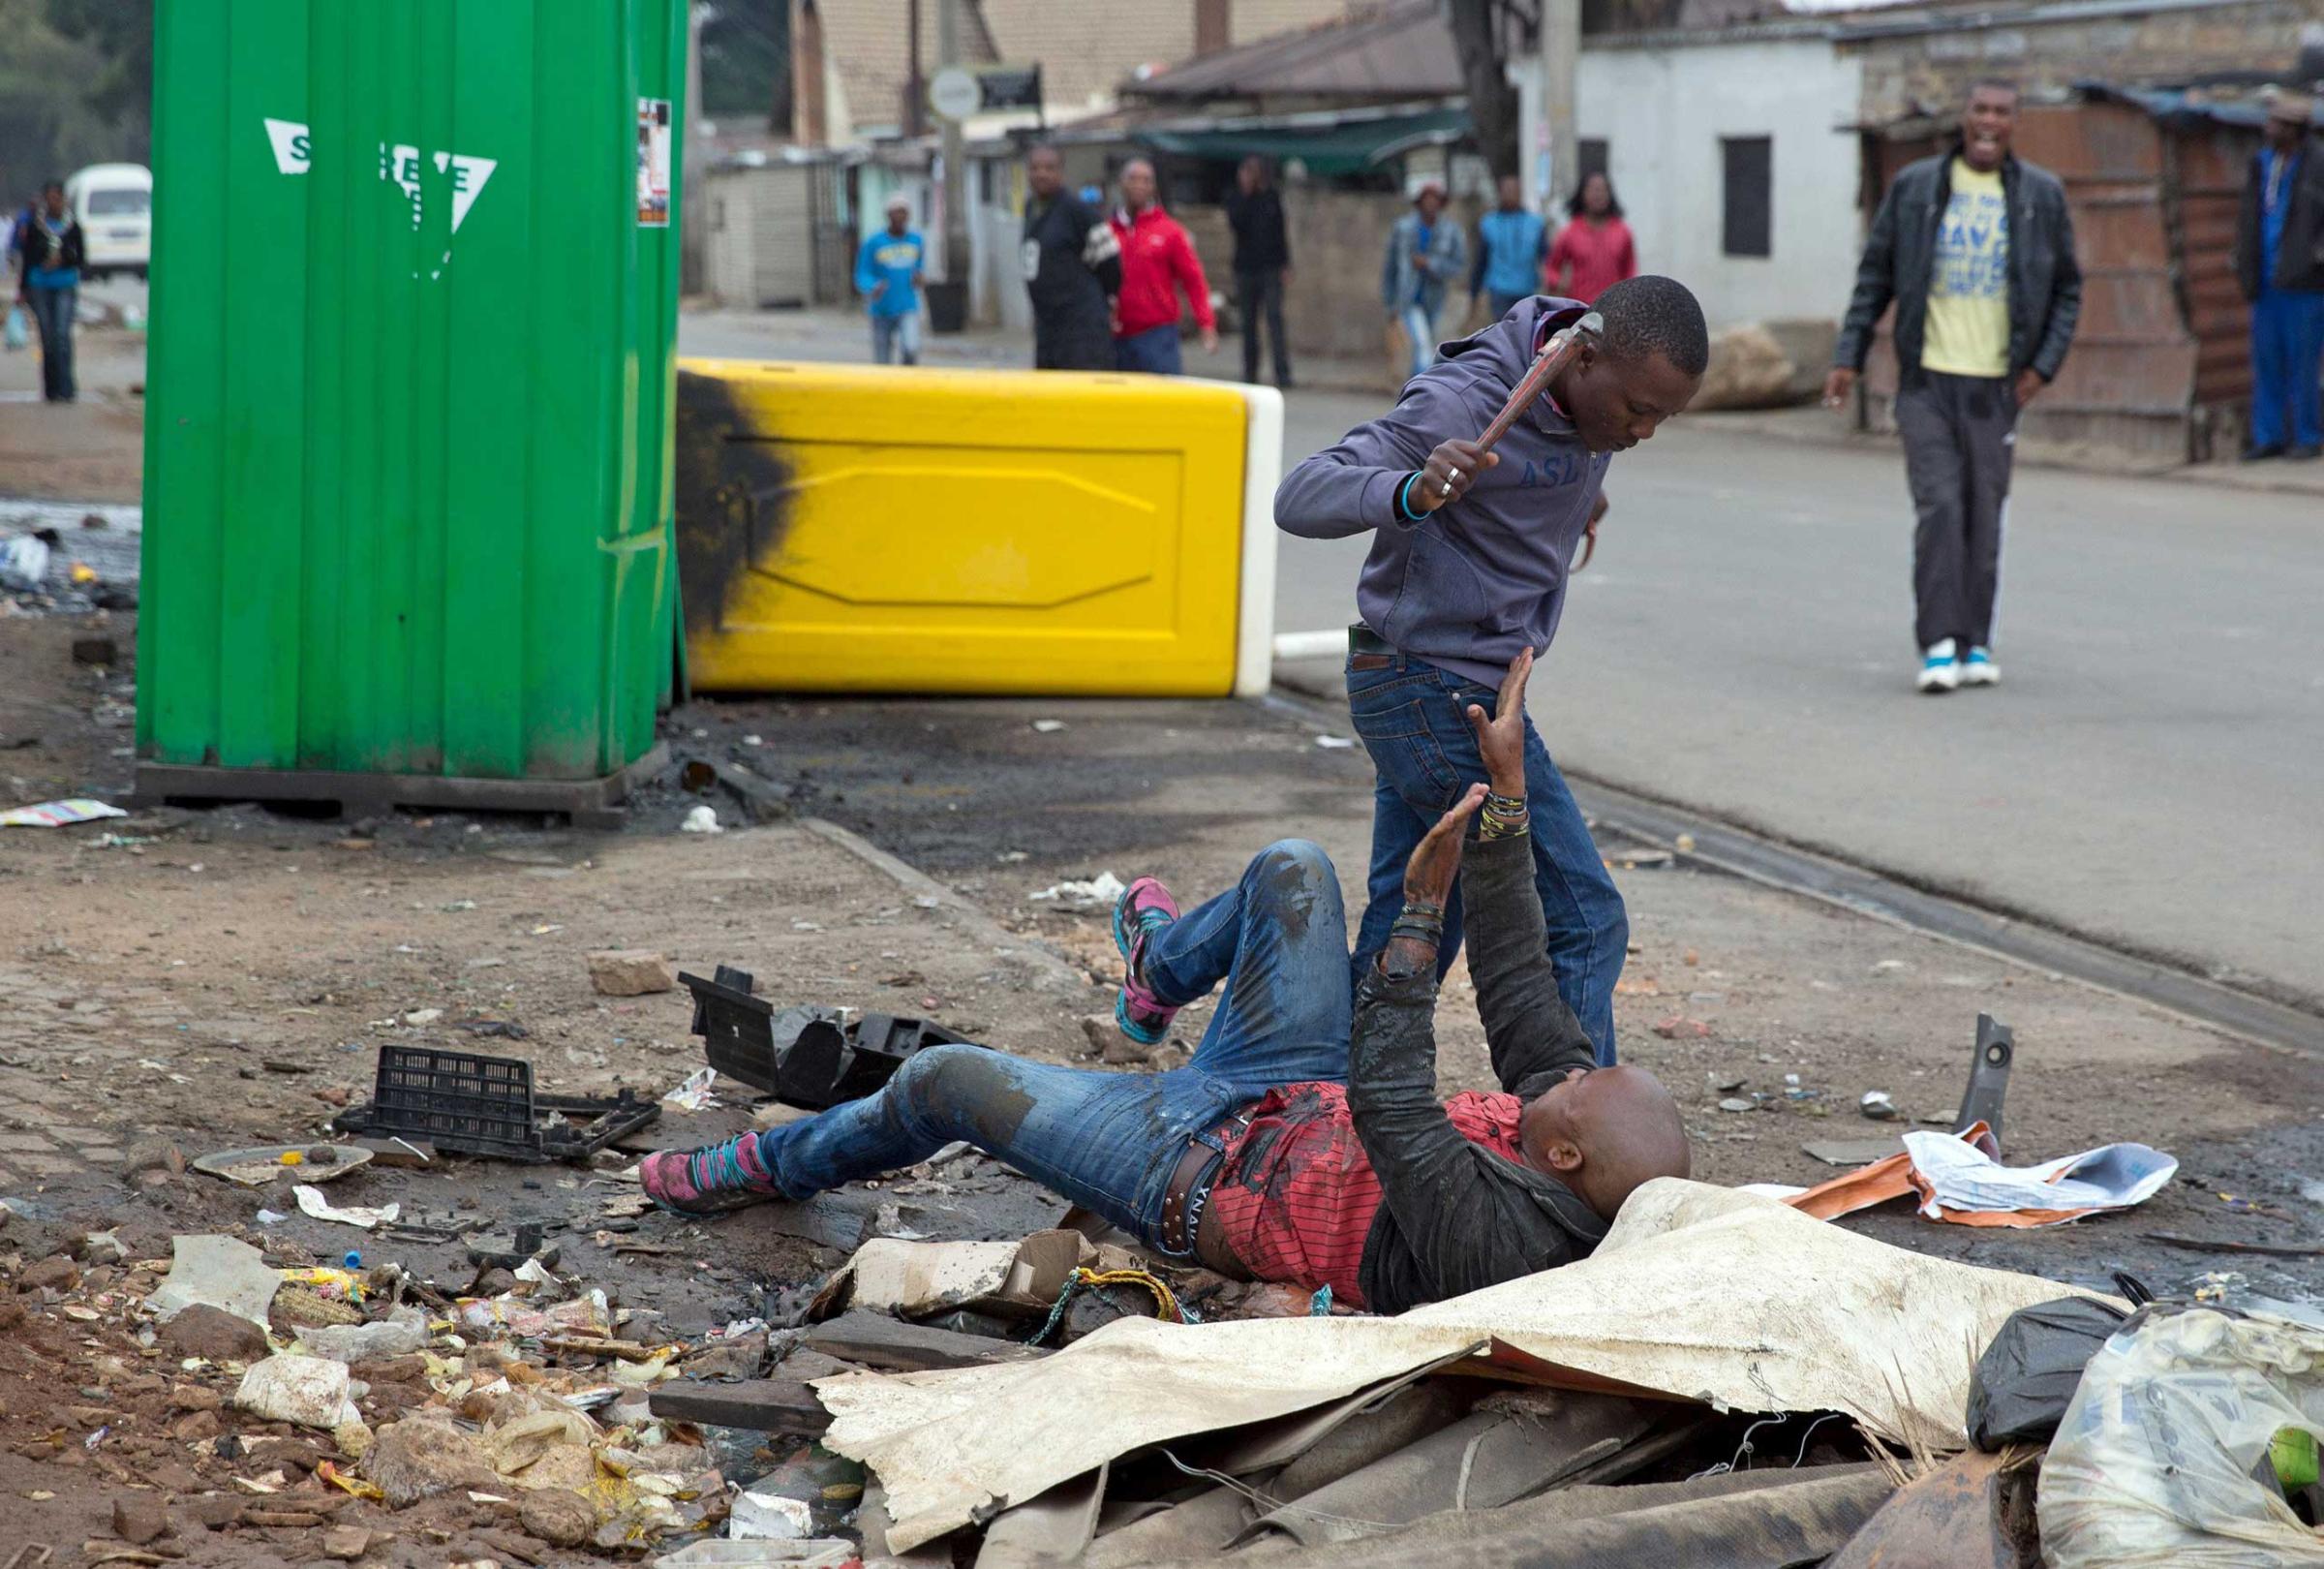 Mozambique national Emmanuel Sithole is attacked in Alexandra township during anti-immigrant violence  in Johannesburg